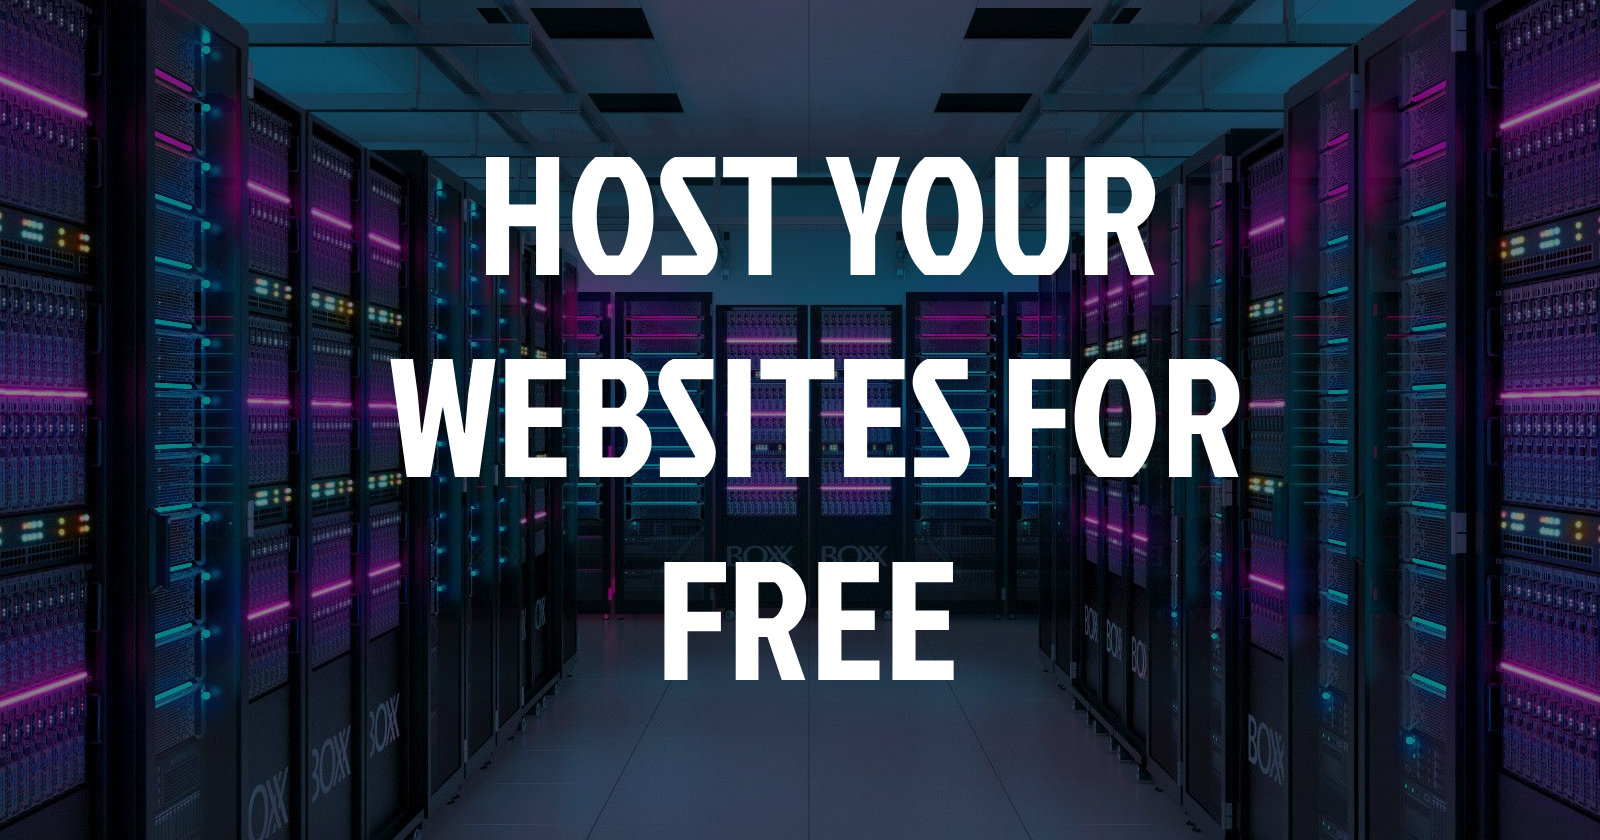 How to host your website for free?